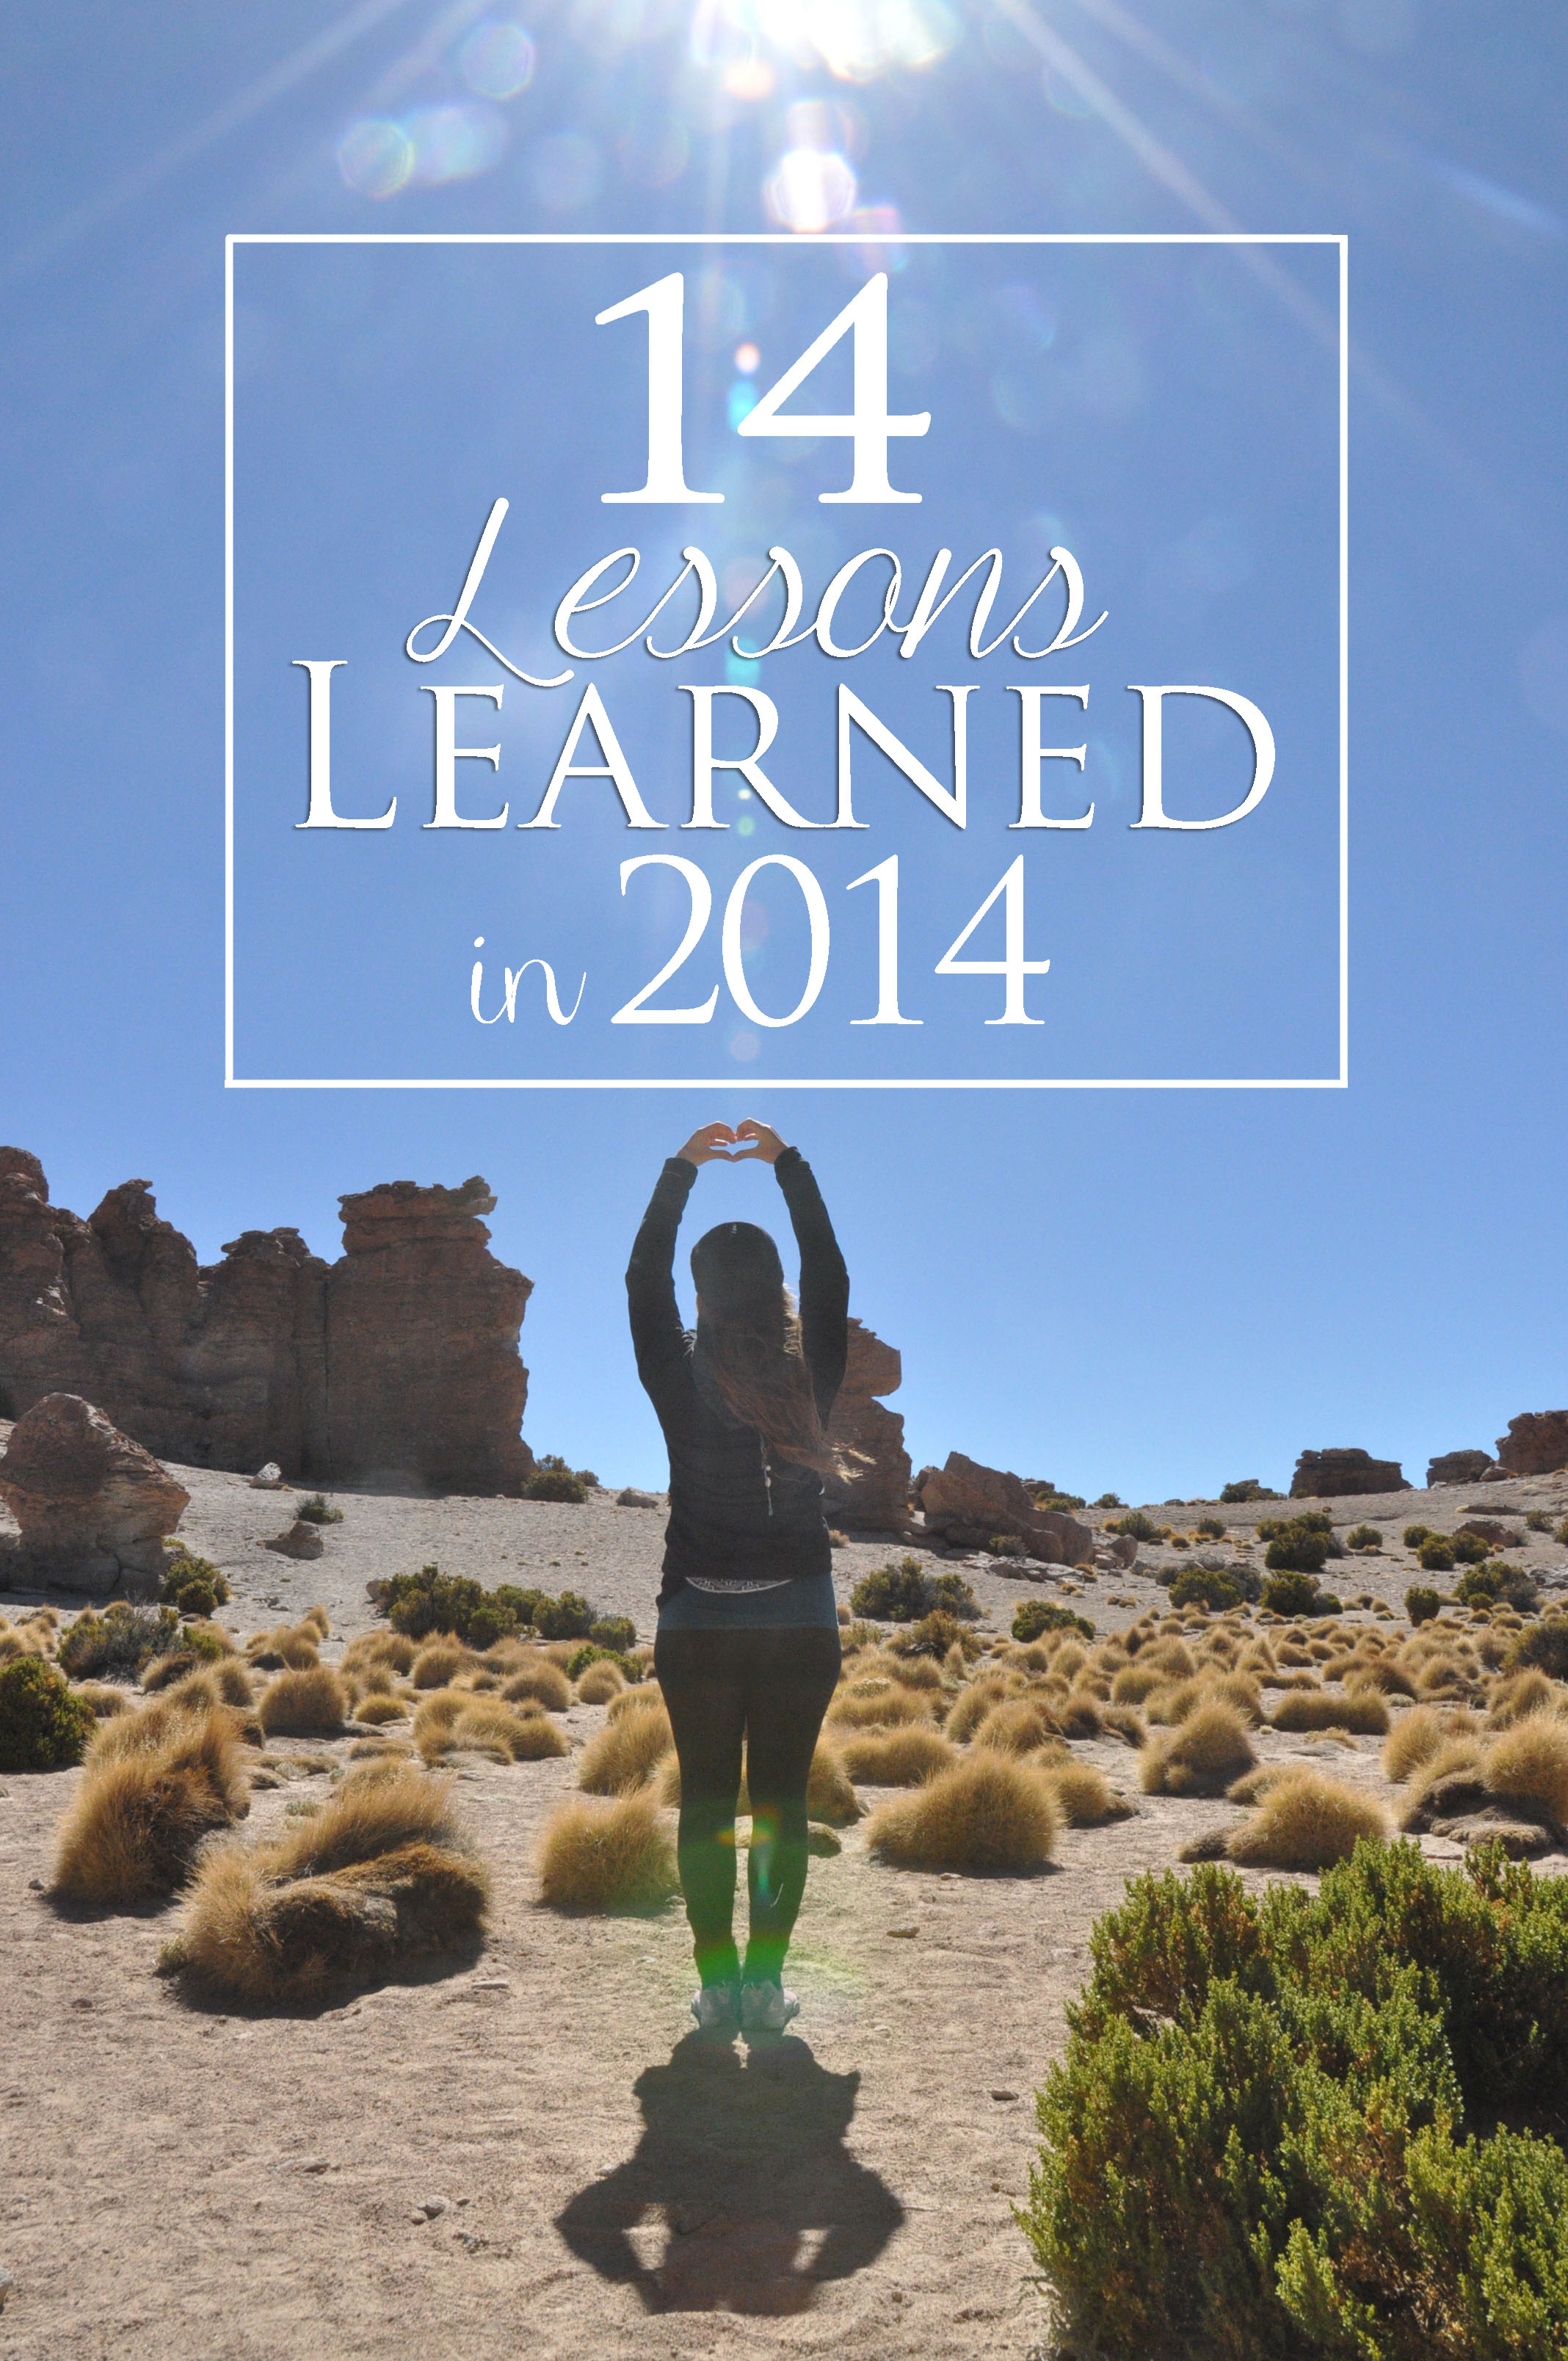 Lessons Learned in 2014